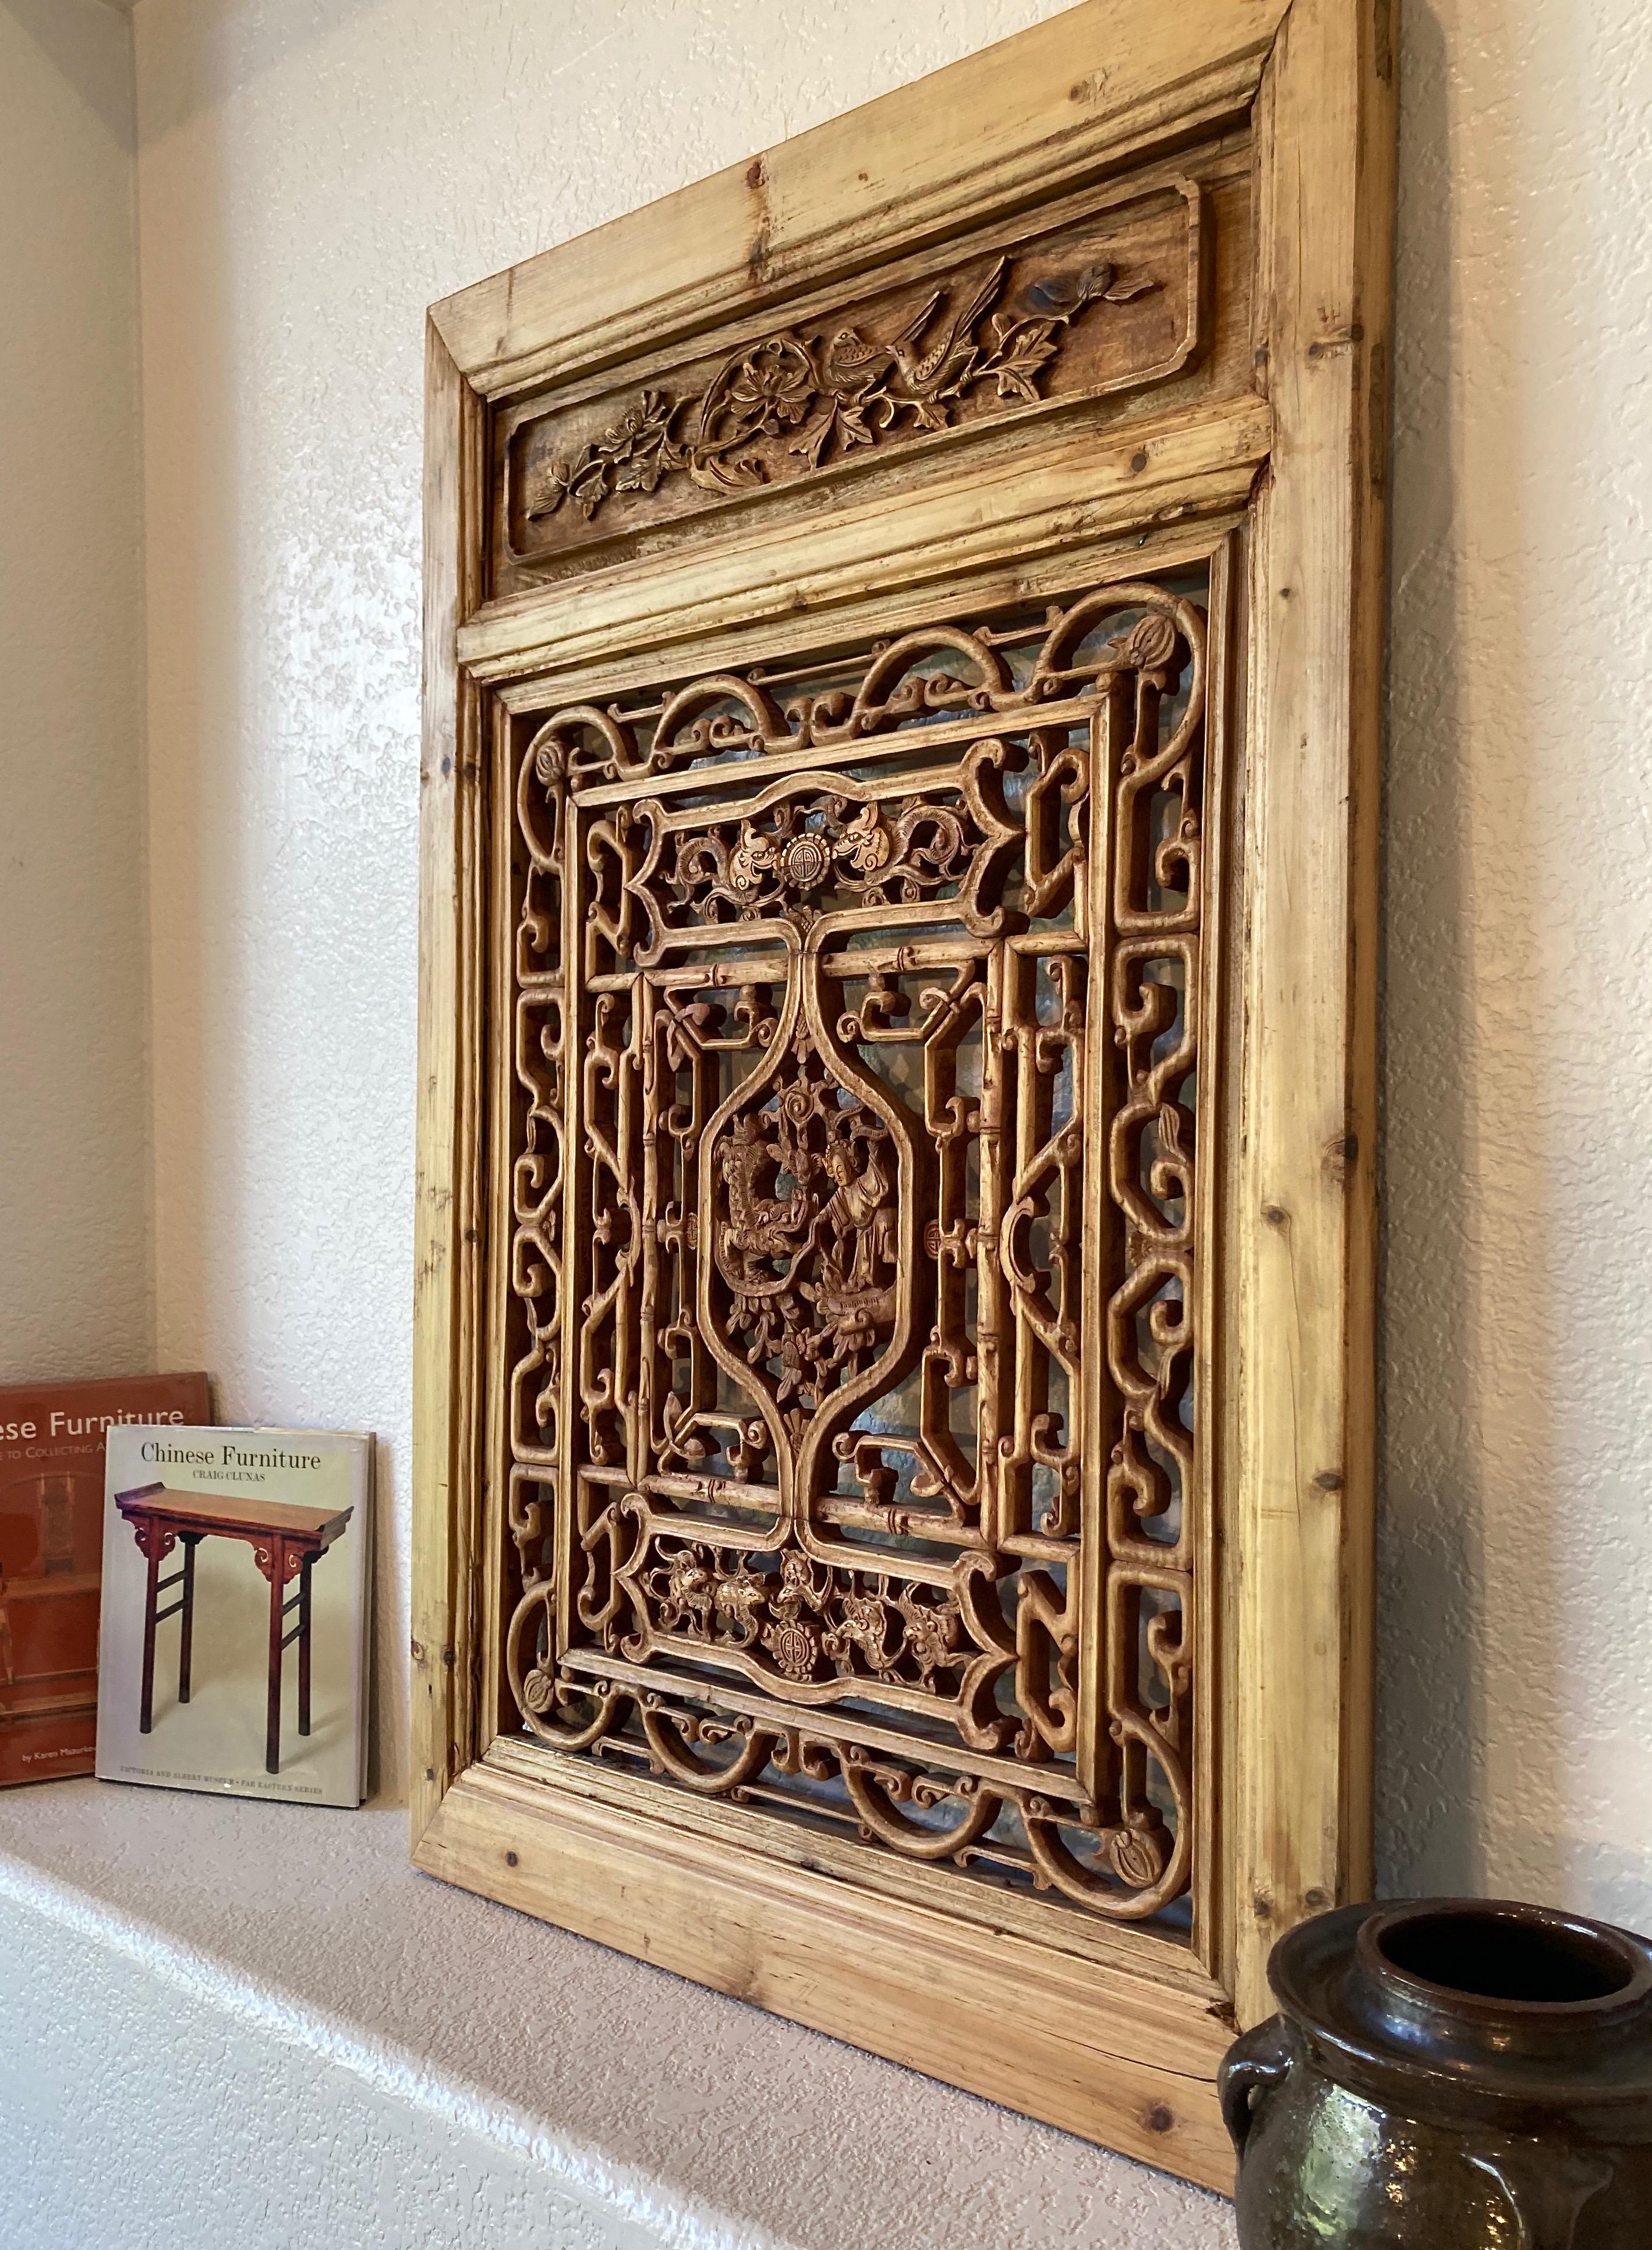 Framed panel, center carving with personage and dragon motifs. Surrounding floral, dragon, animal and bamboo motifs.